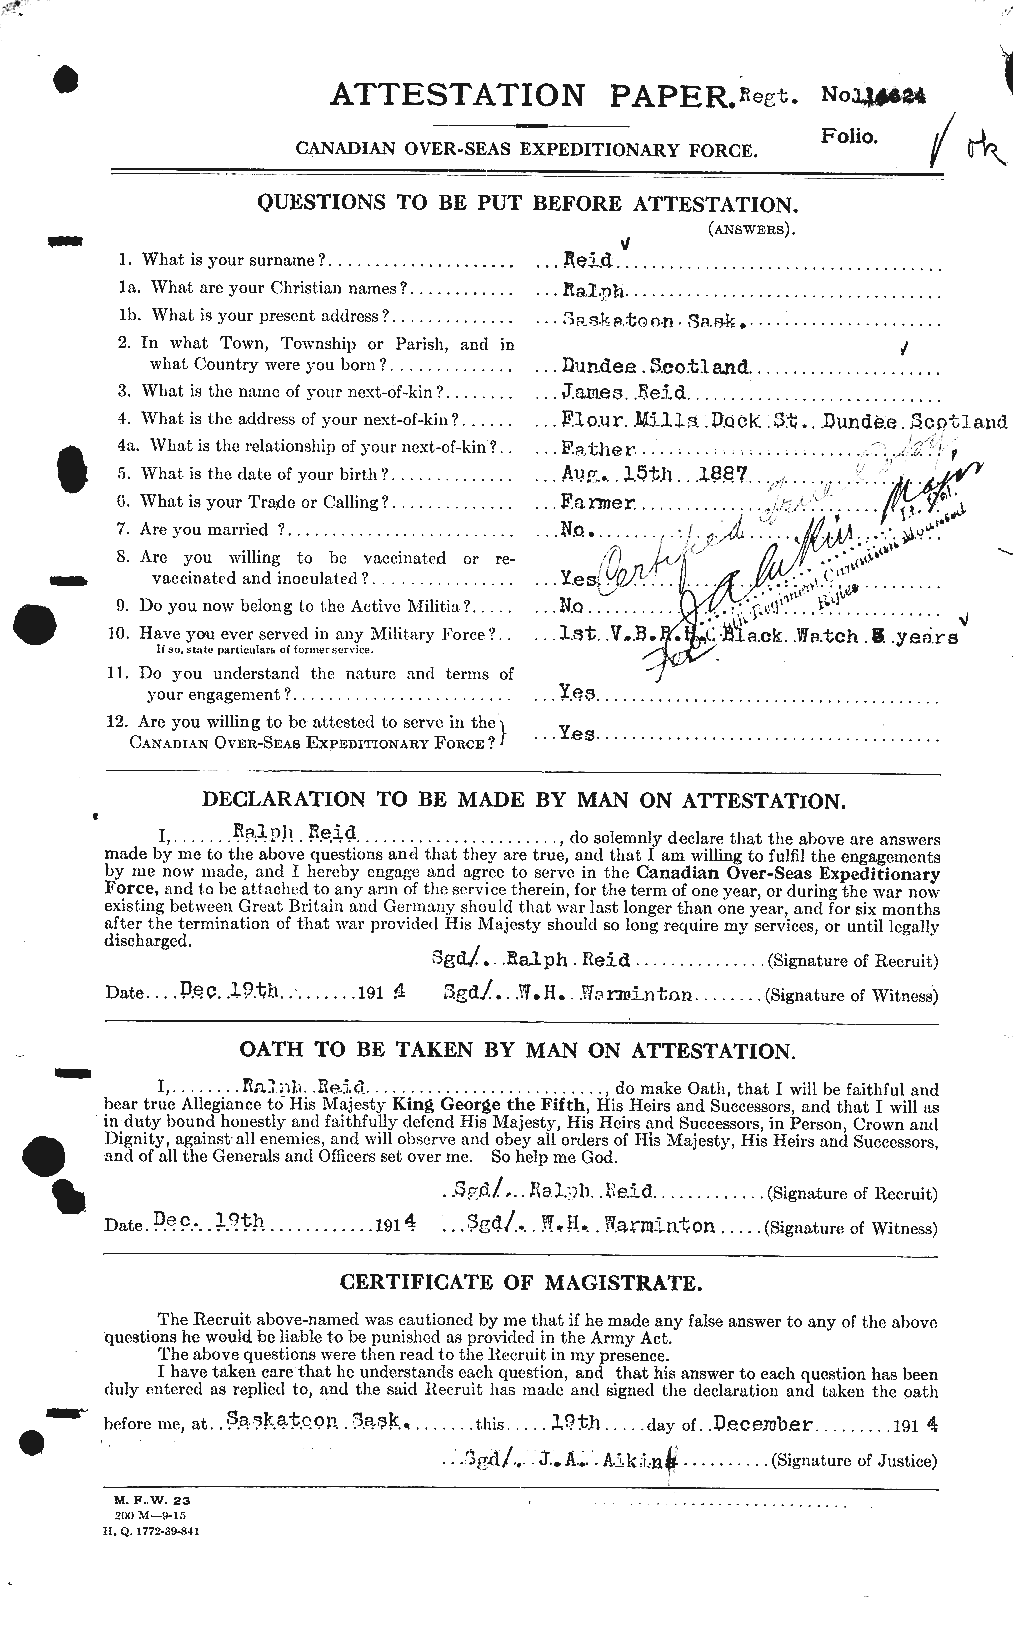 Personnel Records of the First World War - CEF 601847a